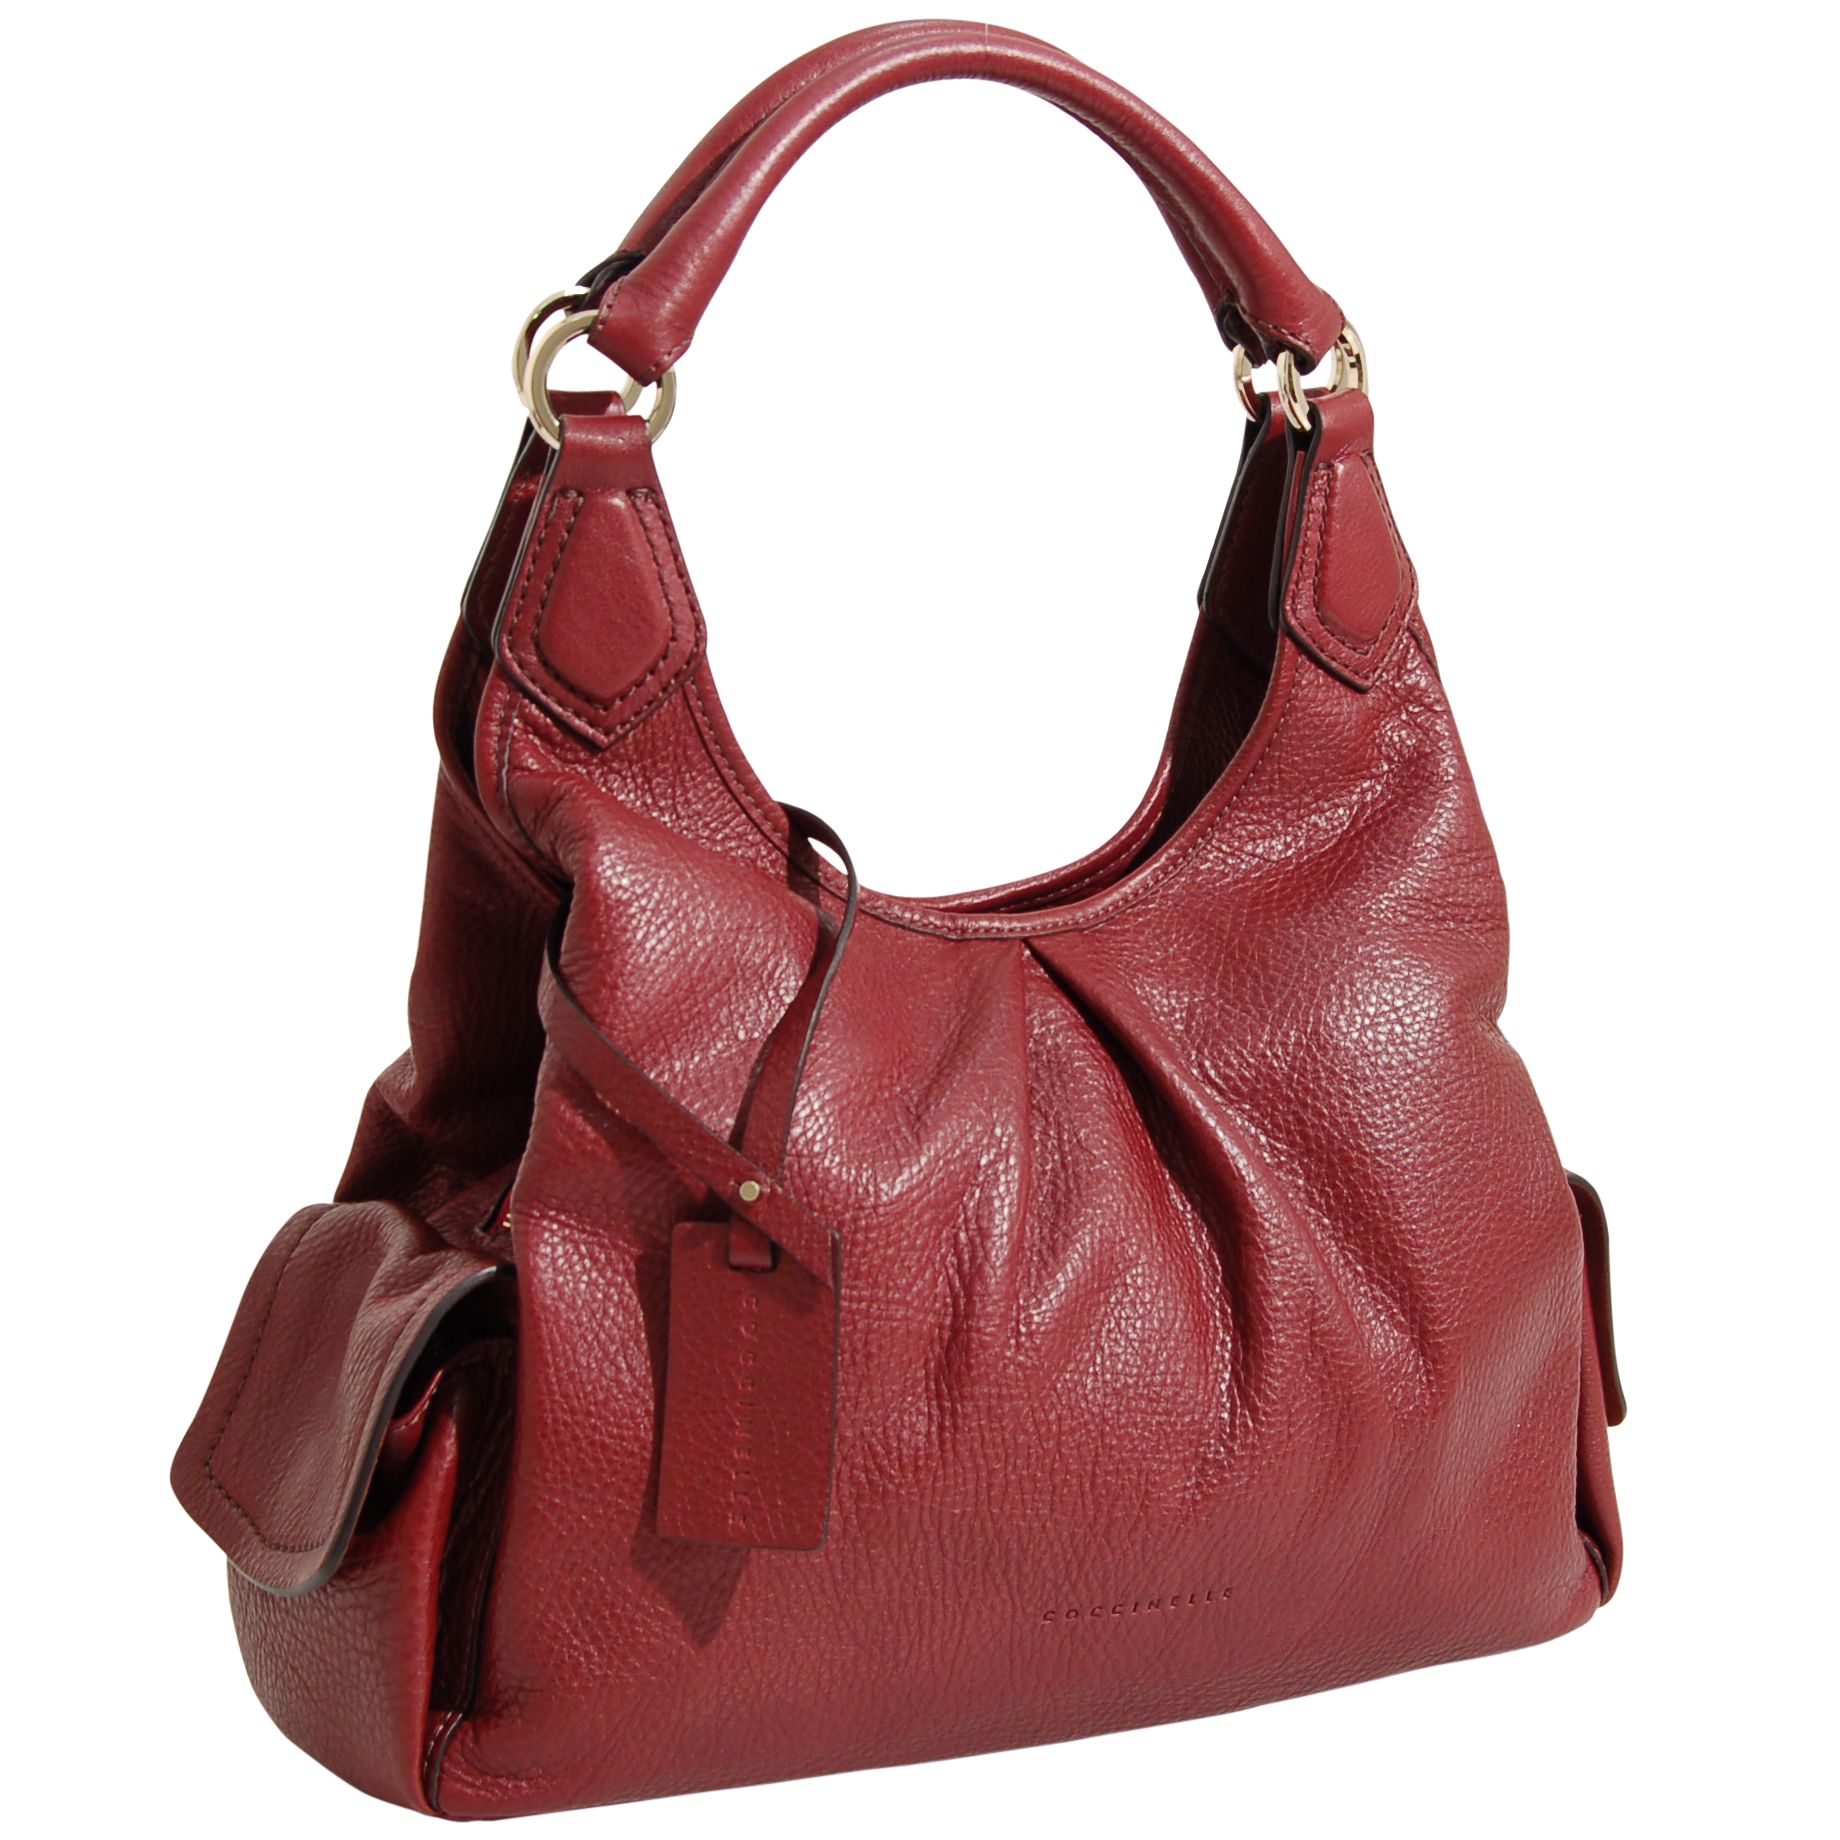 Coccinelle Cate Handbag with Triple Compartments, Red at John Lewis